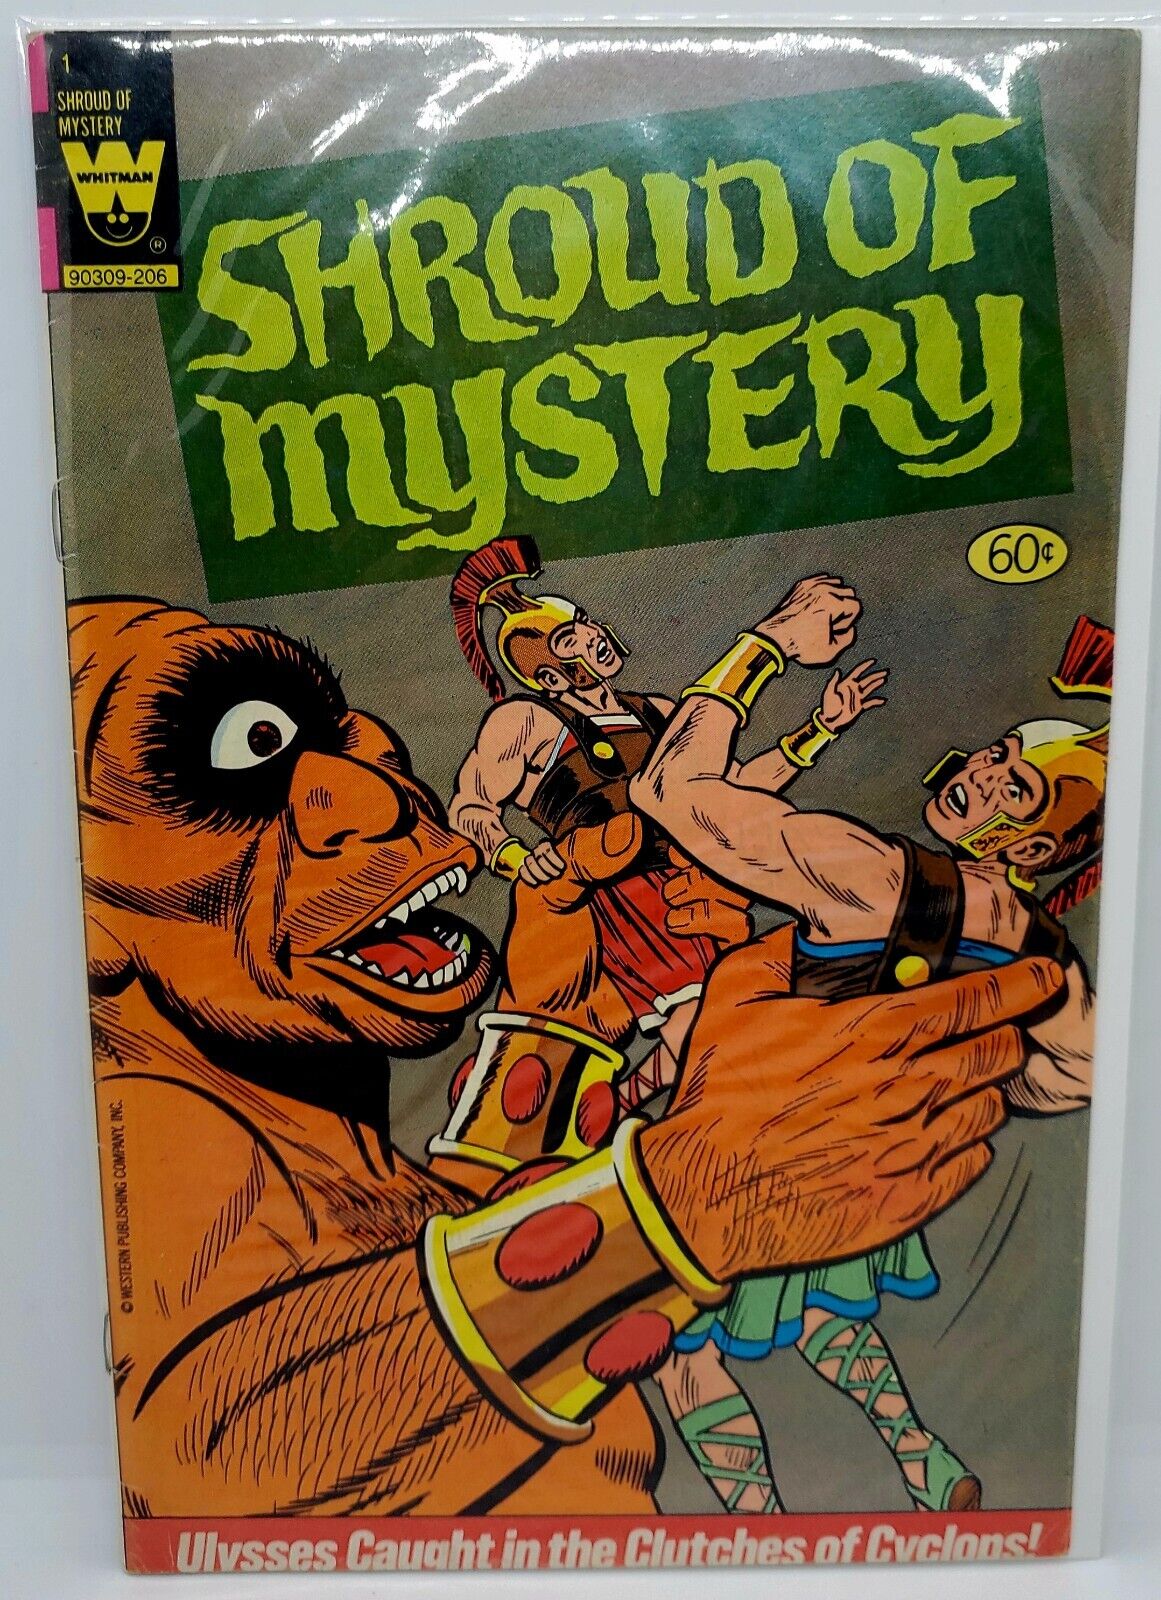 Shroud of Mystery - Issue #1 (1982, Whitman Comics) 1st Print 1st Edition 🔥 